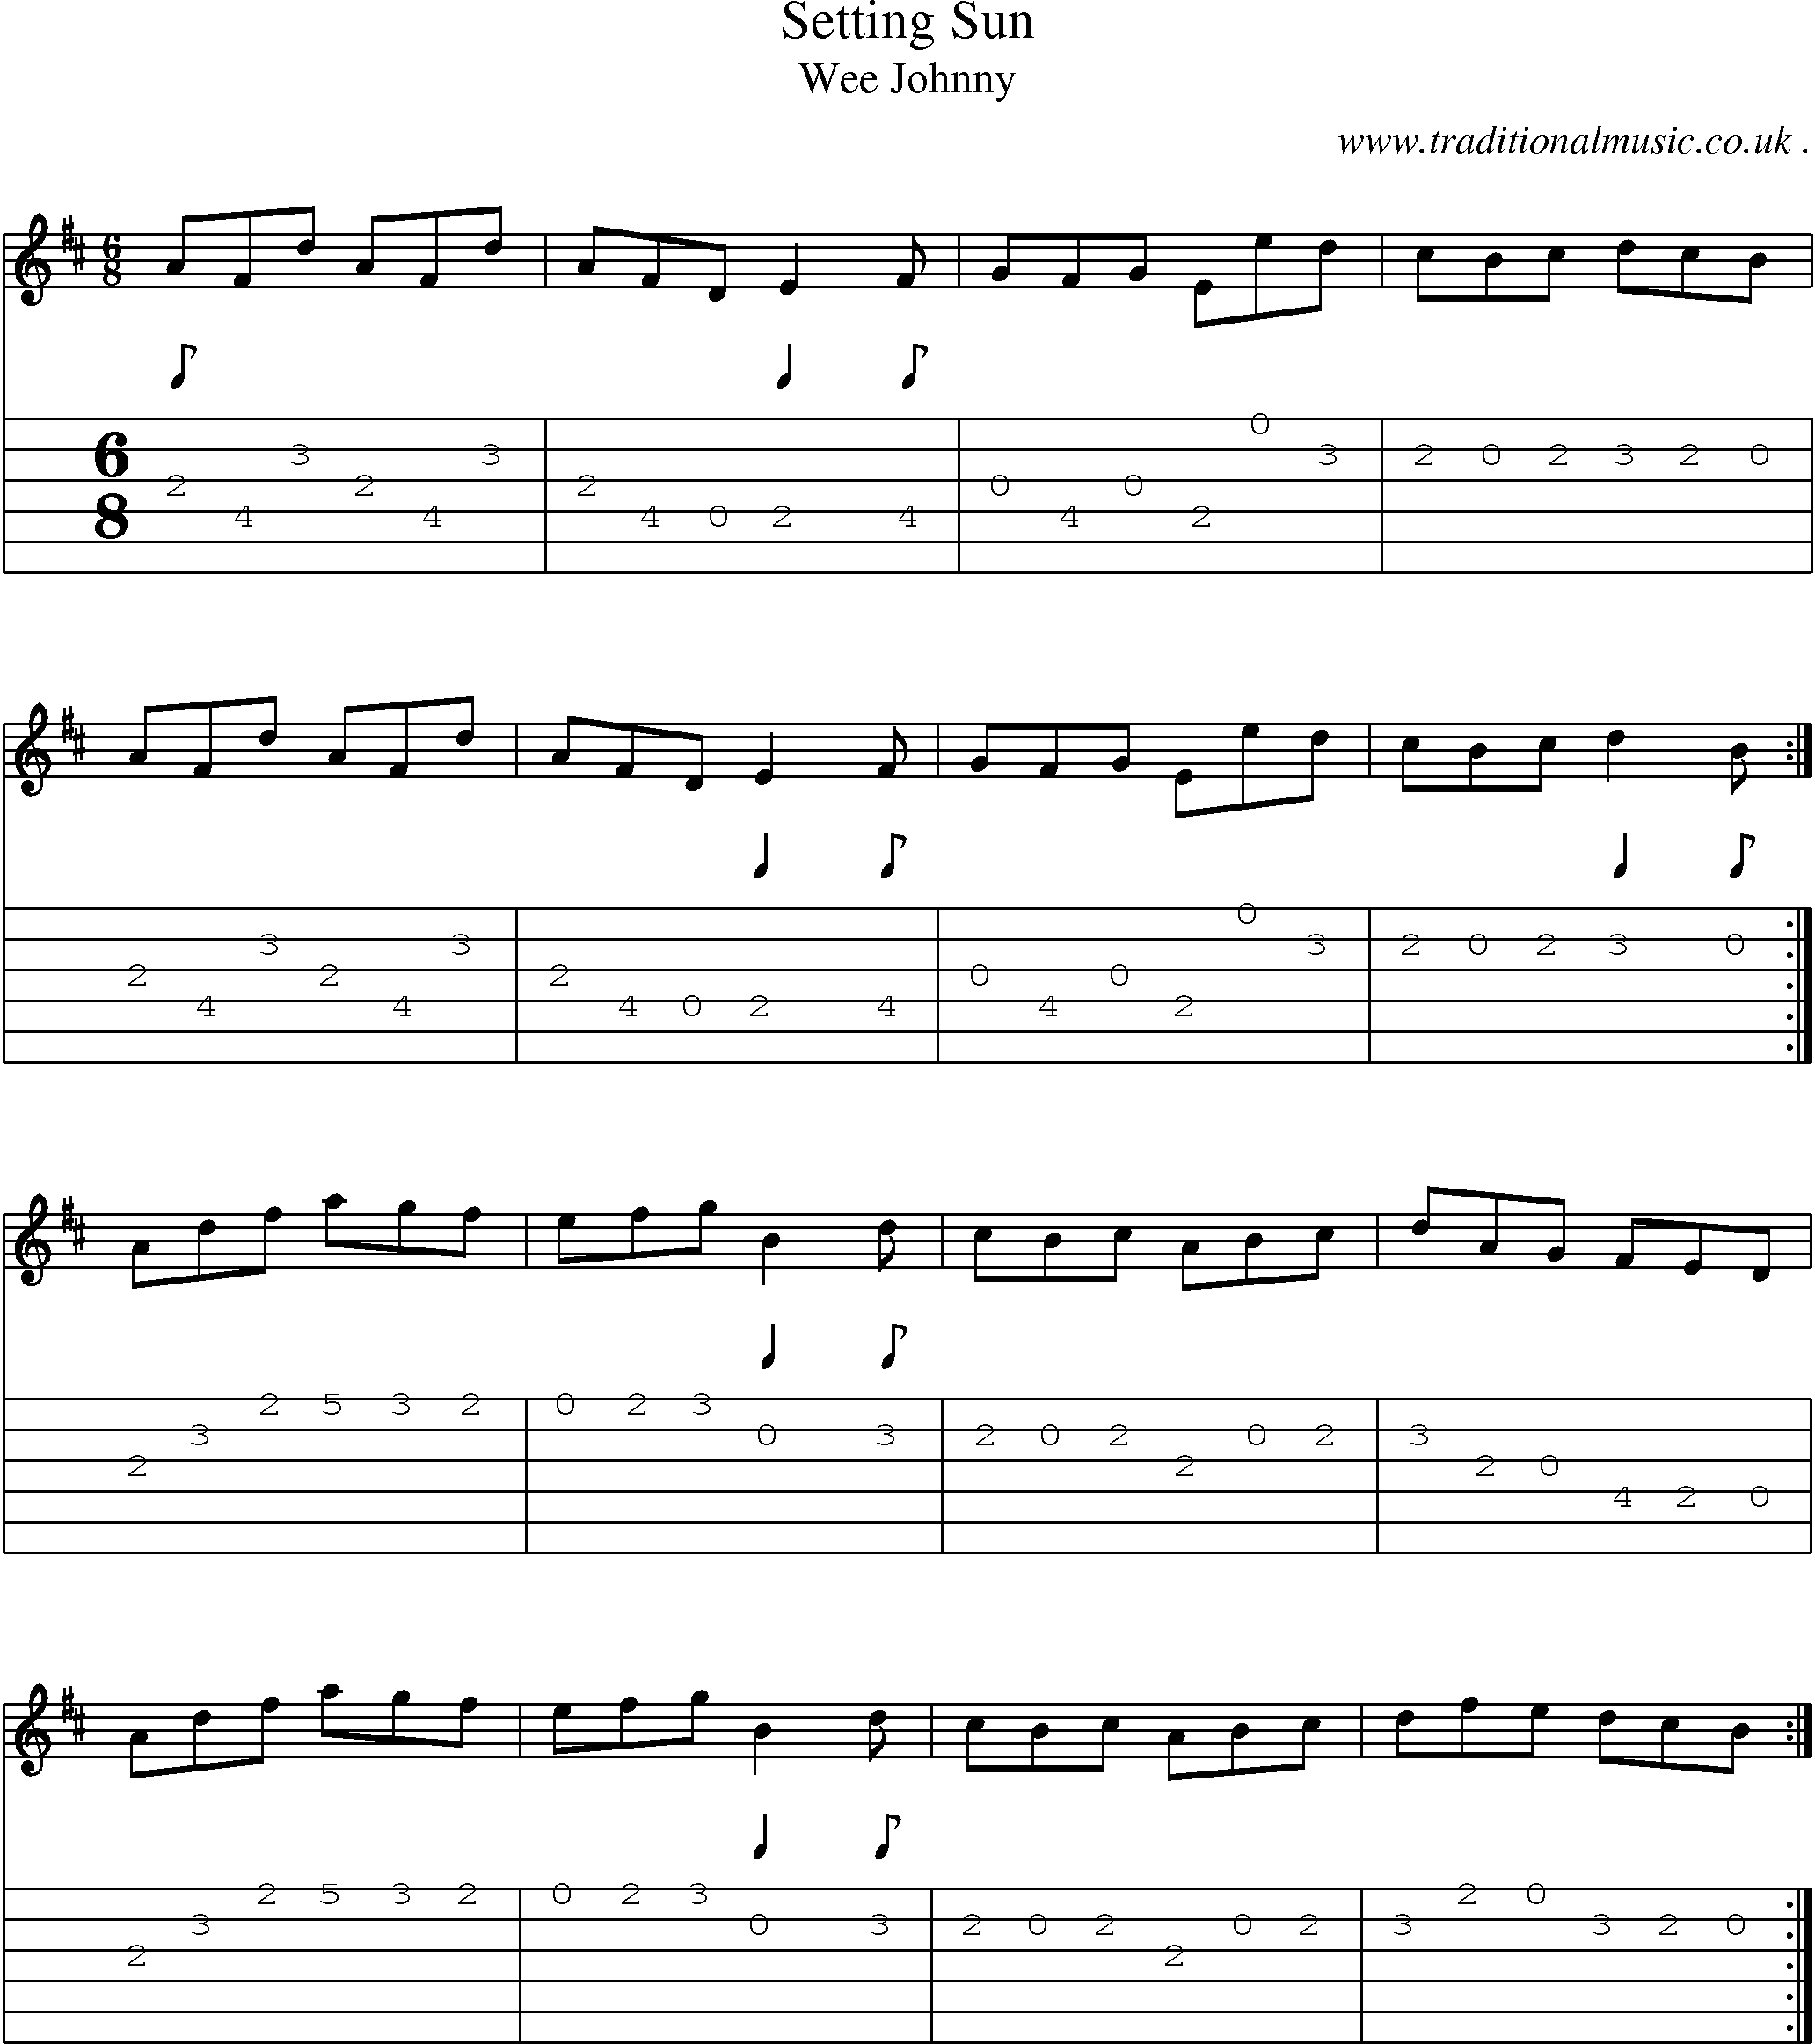 Sheet-Music and Guitar Tabs for Setting Sun